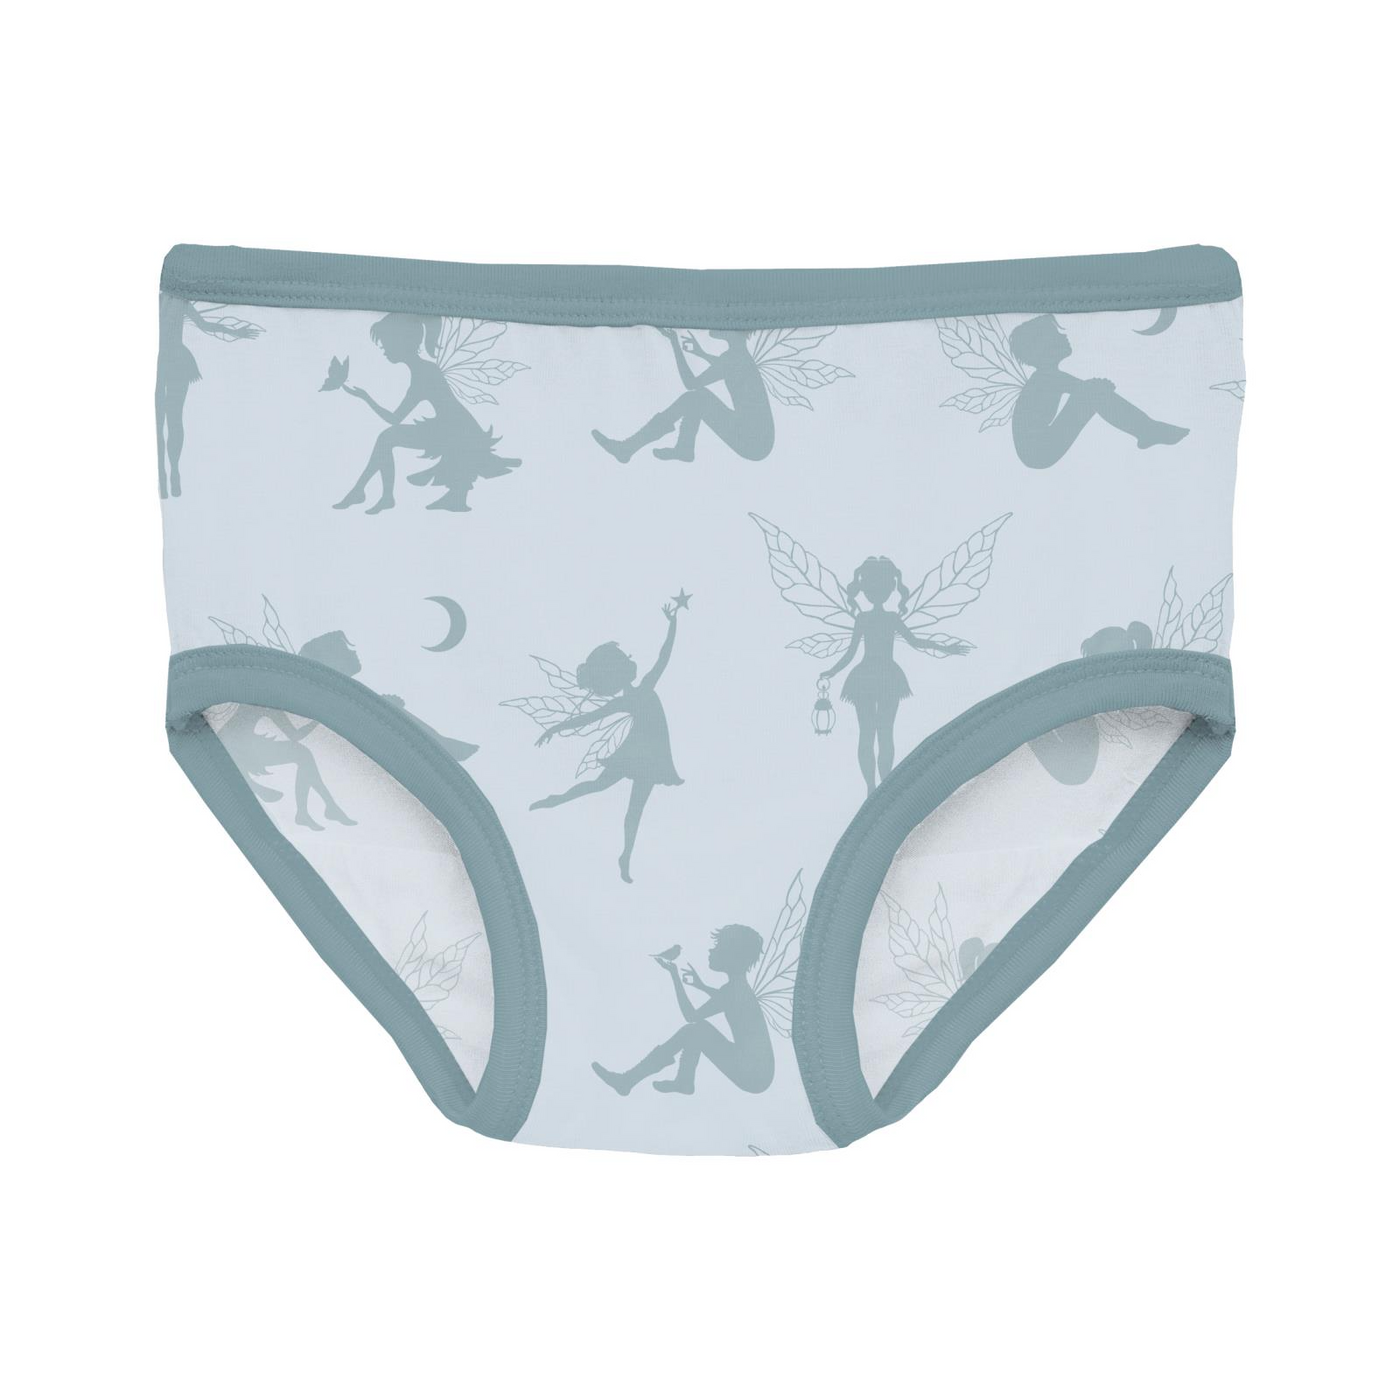 Kickee Pants Girl's Underwear Set of 3: Blush Enchanted Floral, Stormy Sea & Illusion Blue Forest Fairies